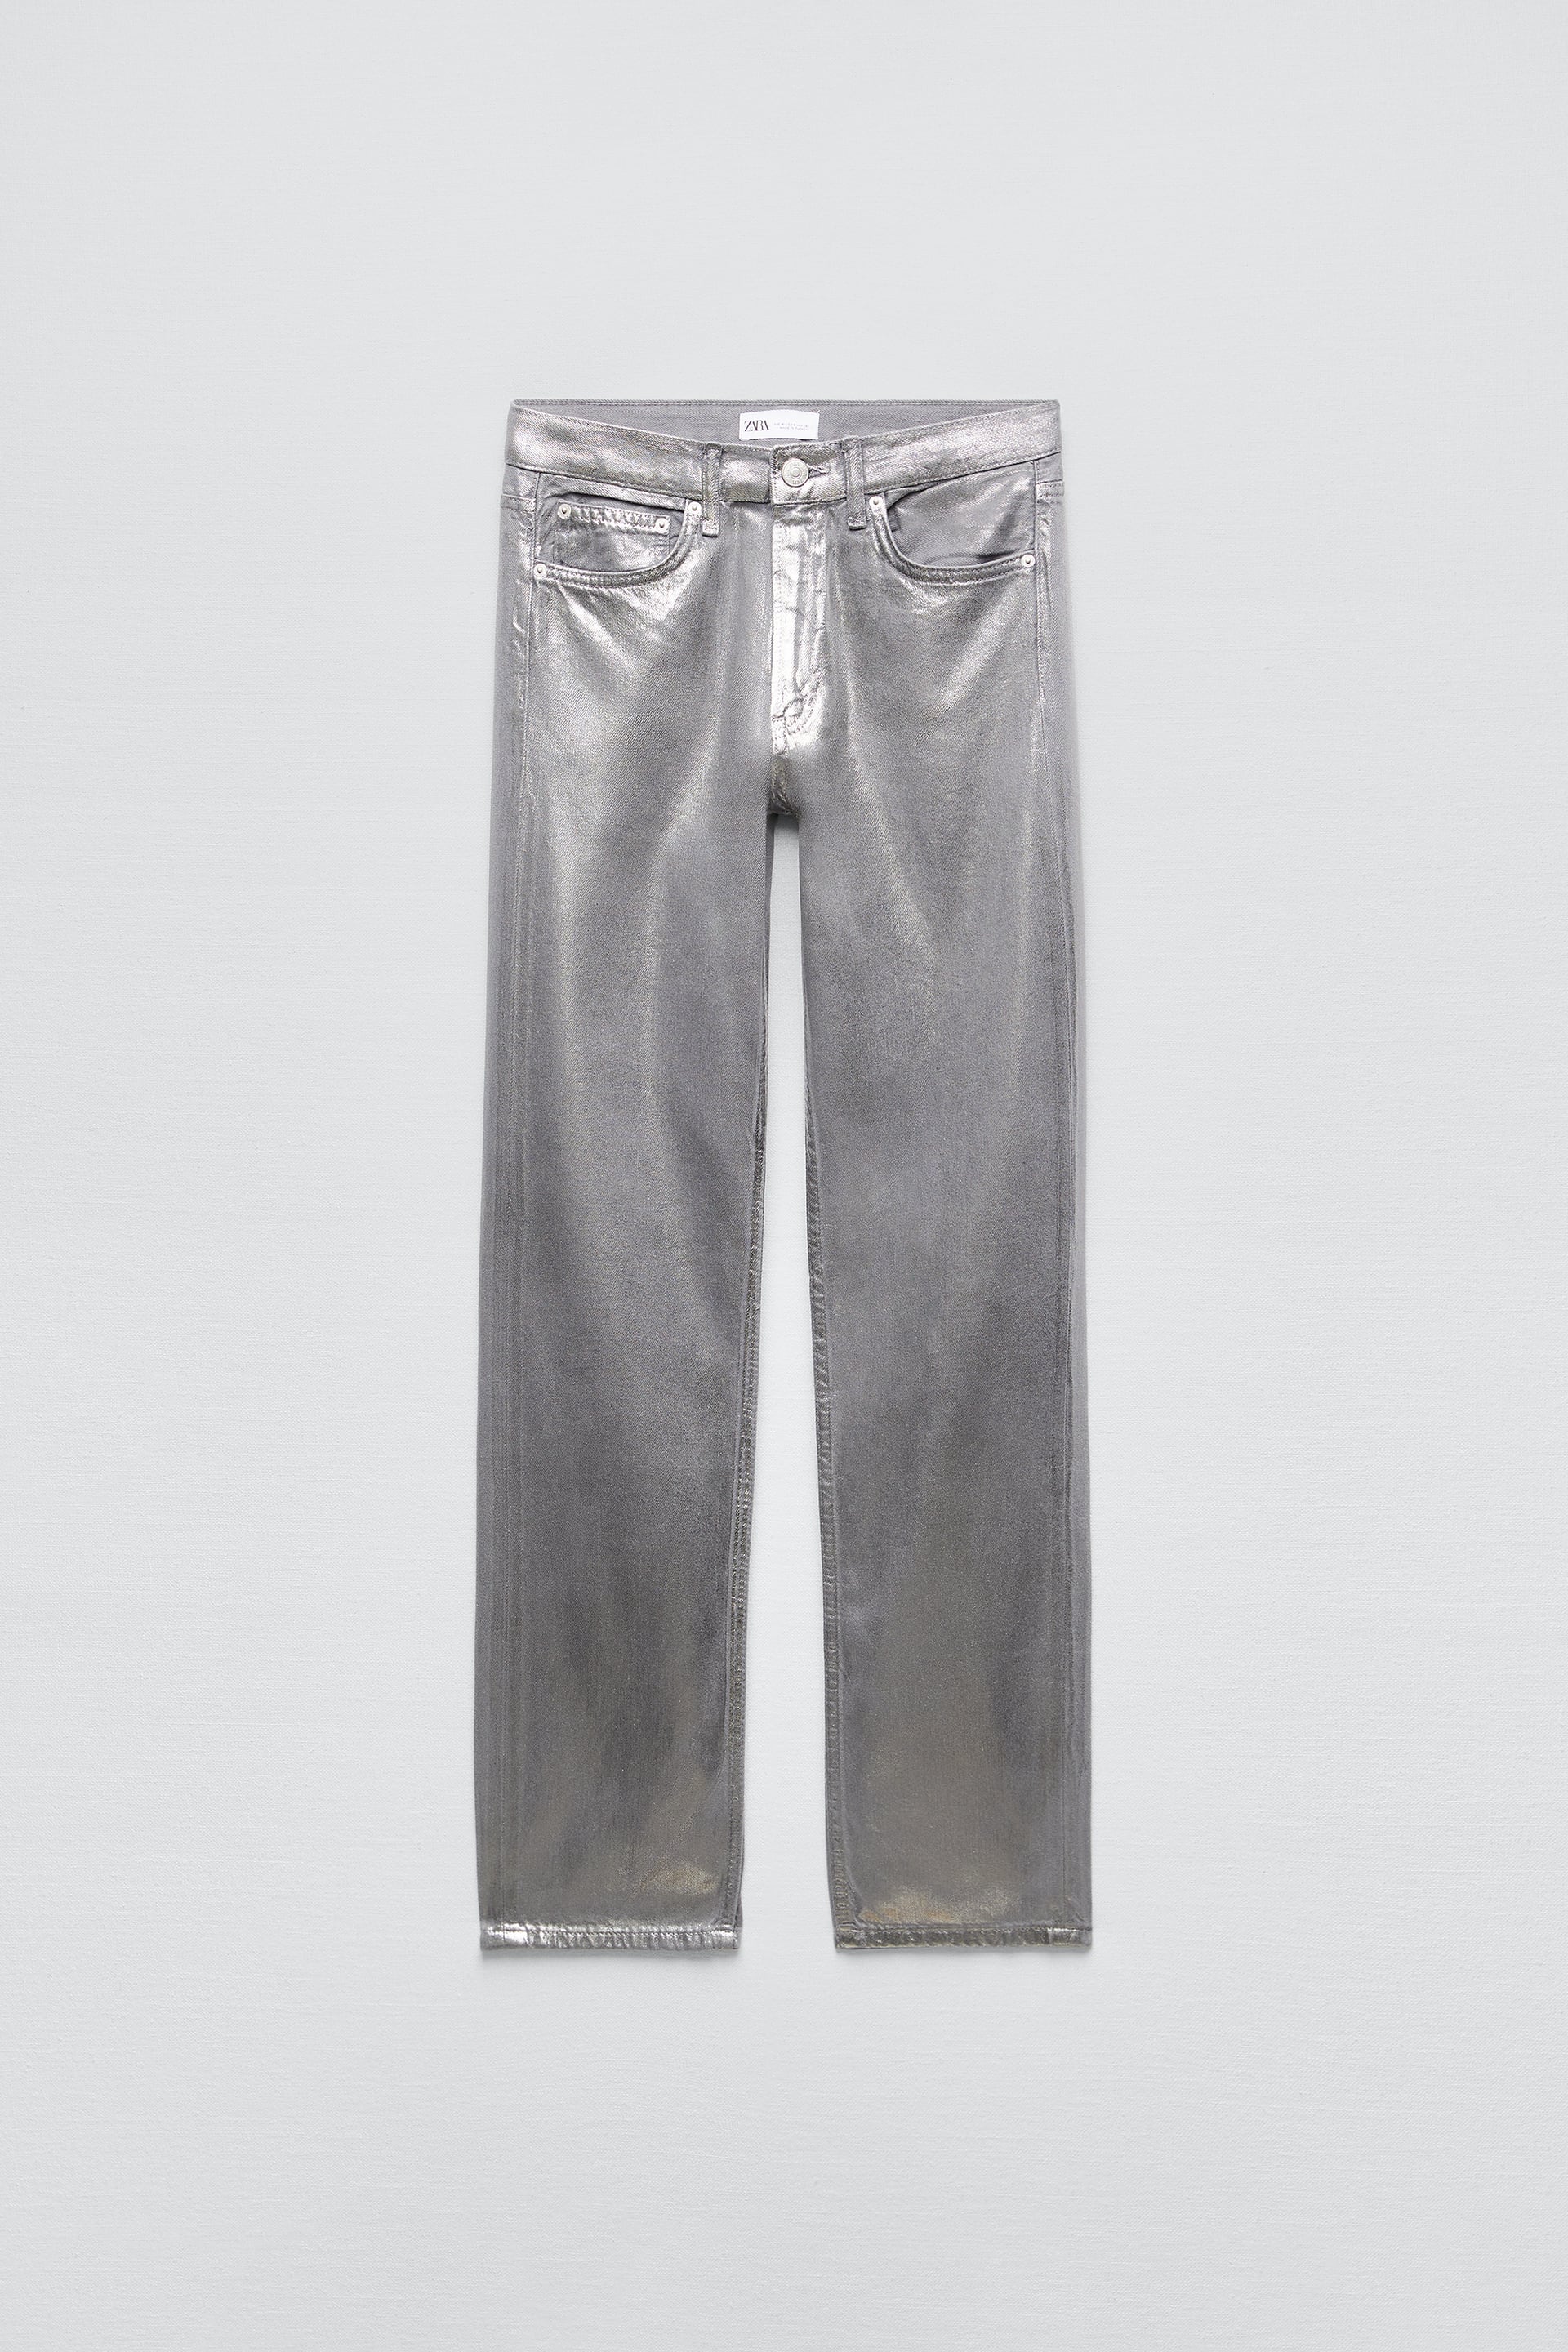 Hopeful Thrust clip TRF STRAIGHT WAXED JEANS - Silver | ZARA United States